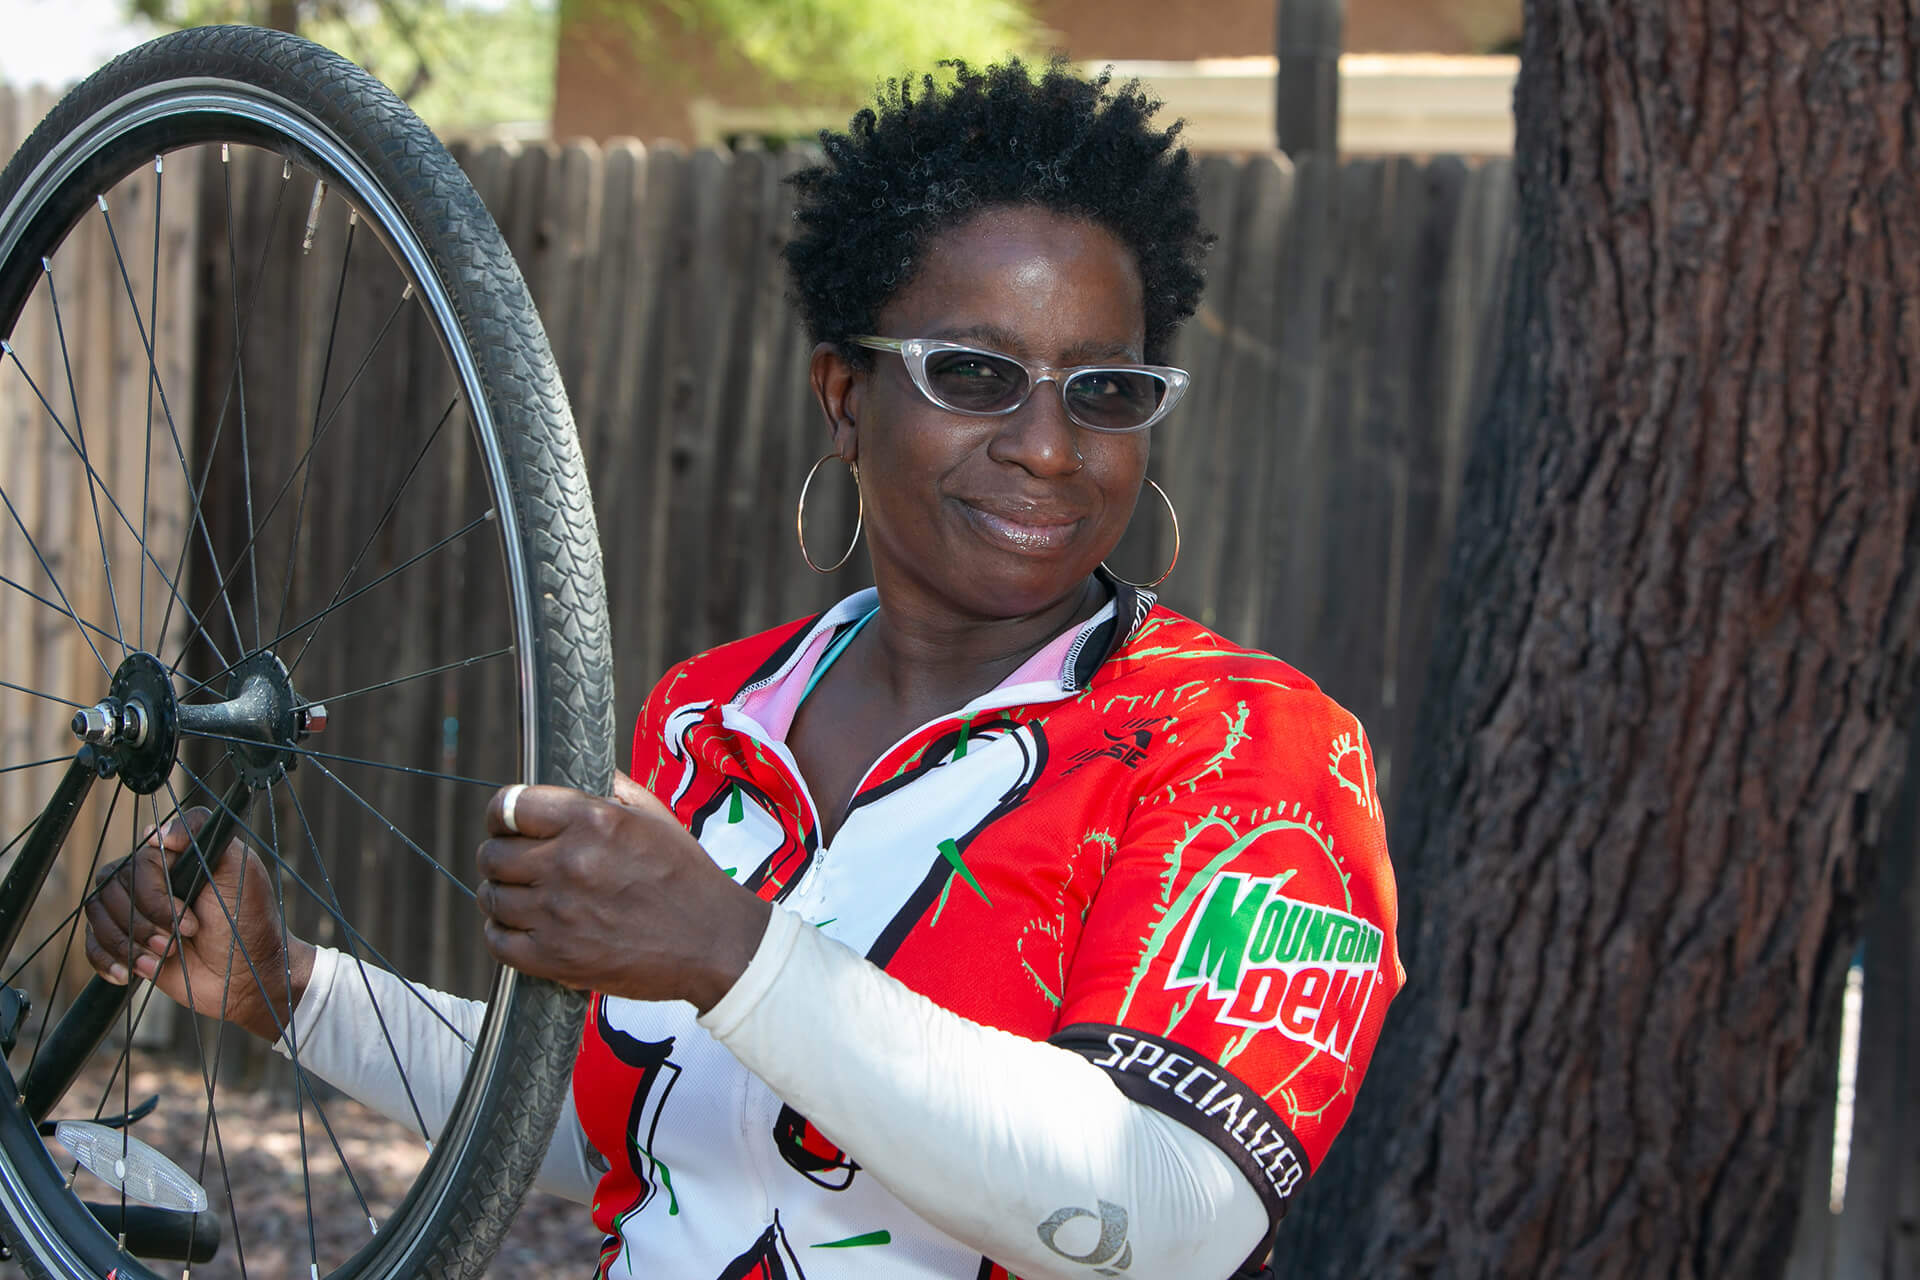 “Covid19 has directly and indirectly affected communities of color. As black folk, we are predisposed to heart disease, diabetes, hypertension and obesity. Biking offers solutions that can plague our community. Biking is not only a source of exercise, but can be a mechanism to self-awareness, discipline and self-empowerment.” – Lucy